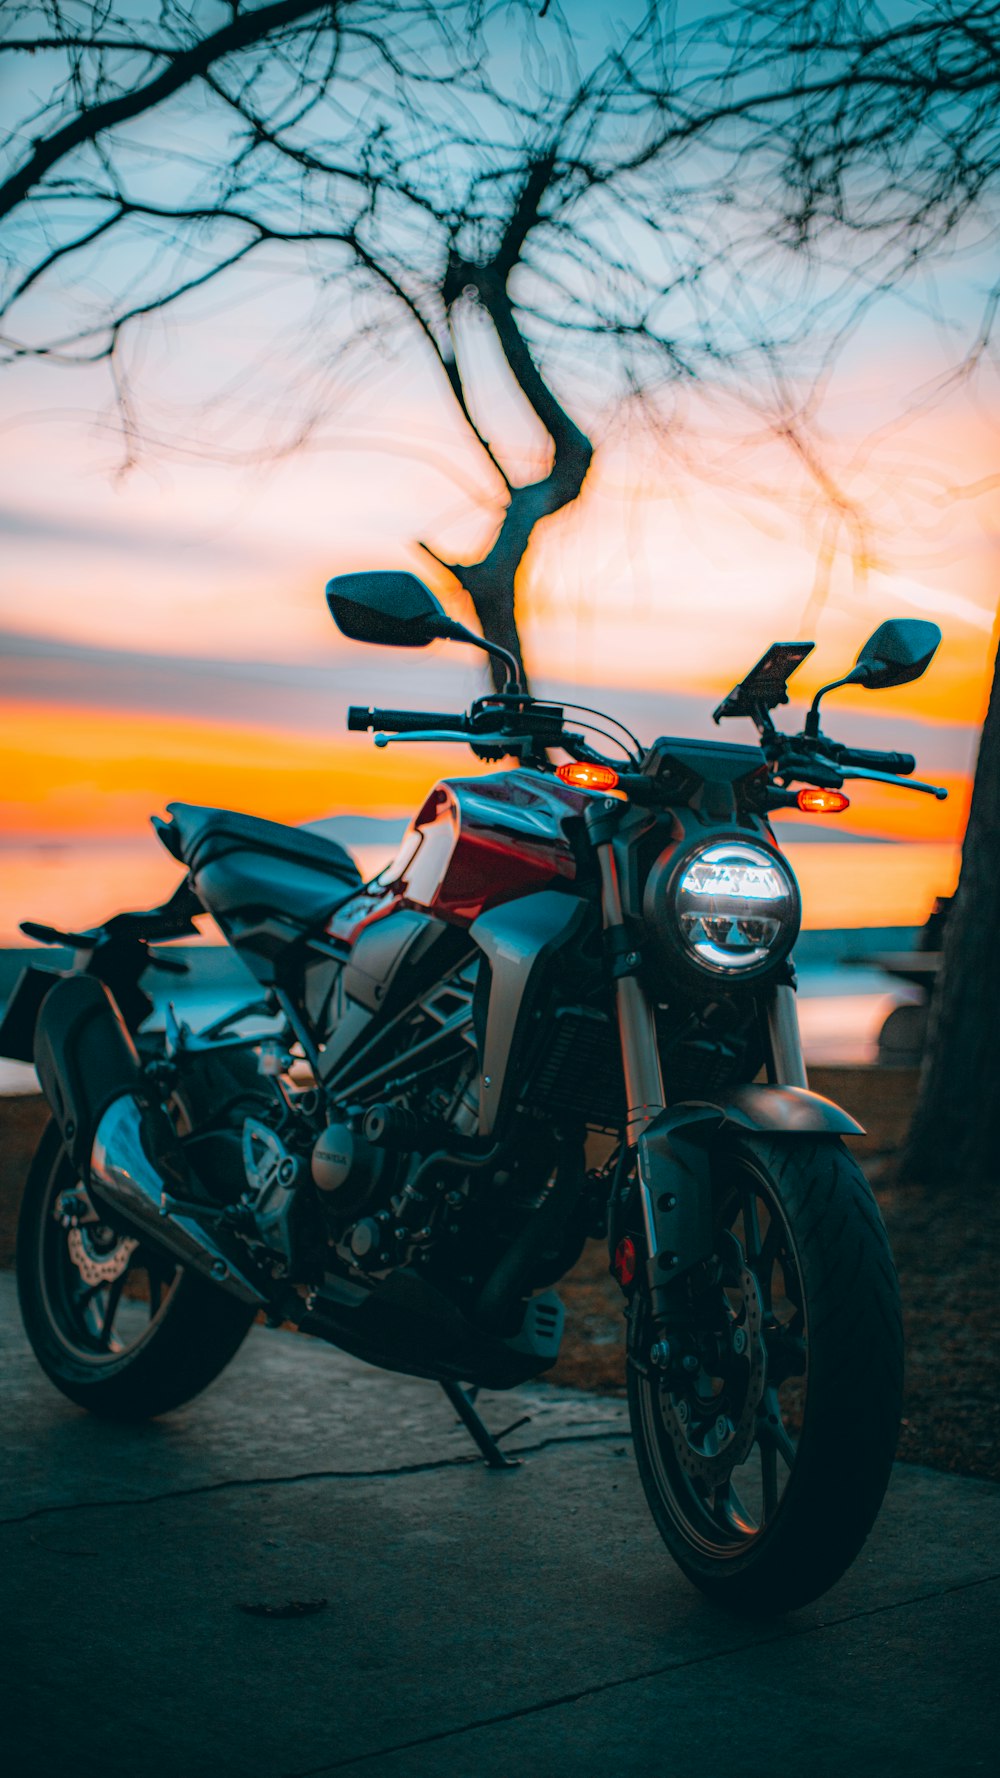 black and gray motorcycle during sunset